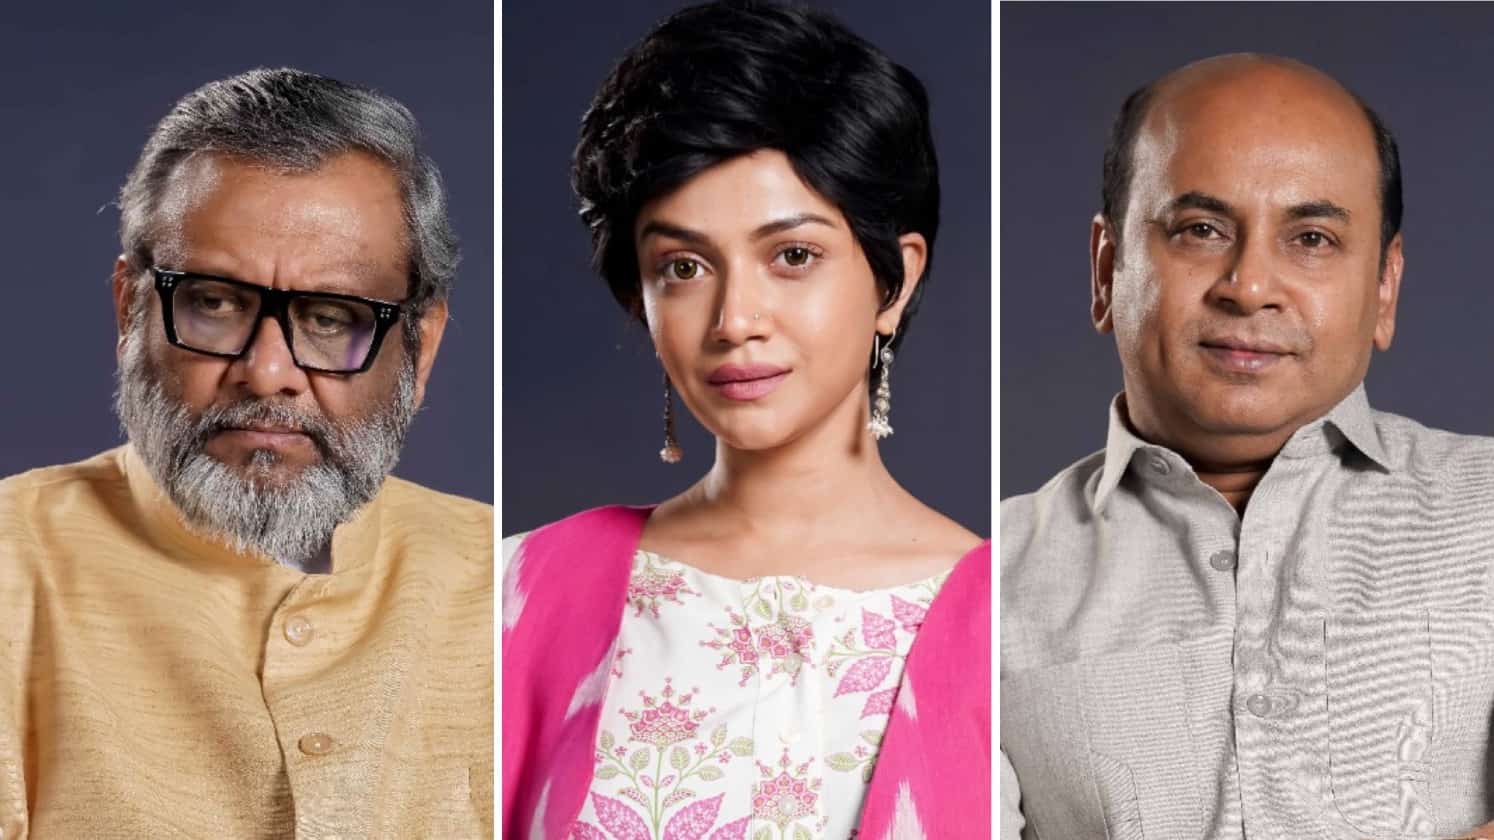 https://www.mobilemasala.com/film-gossip/Nothings-Real-Check-Out-New-Photos-S-Sreejit-Mukherjee-Reveals-Names-Of-Old-Cast-From-14-Years-i276281